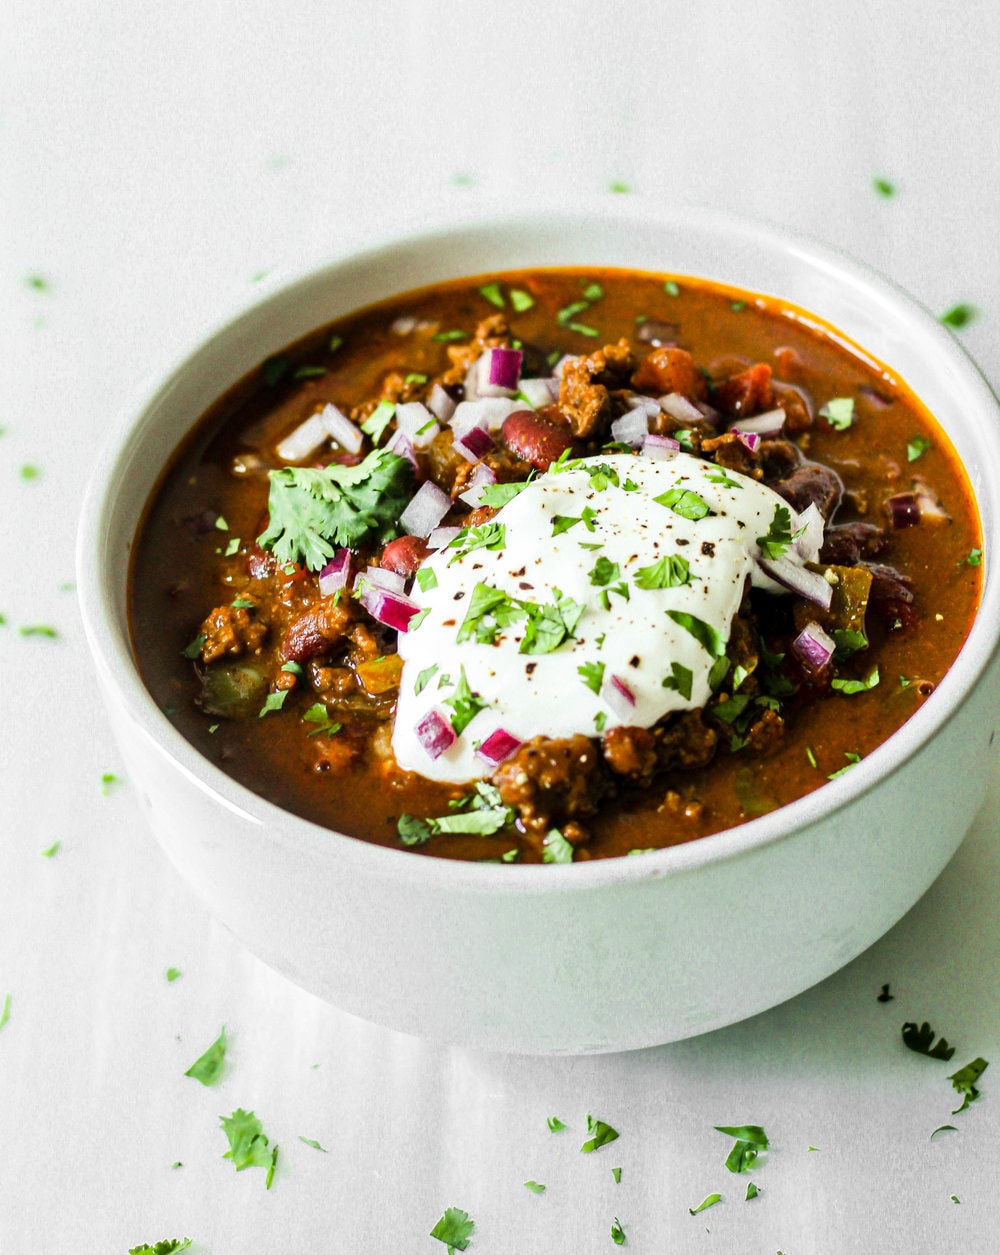 Easy Pumpkin Chili All The Healthy Things